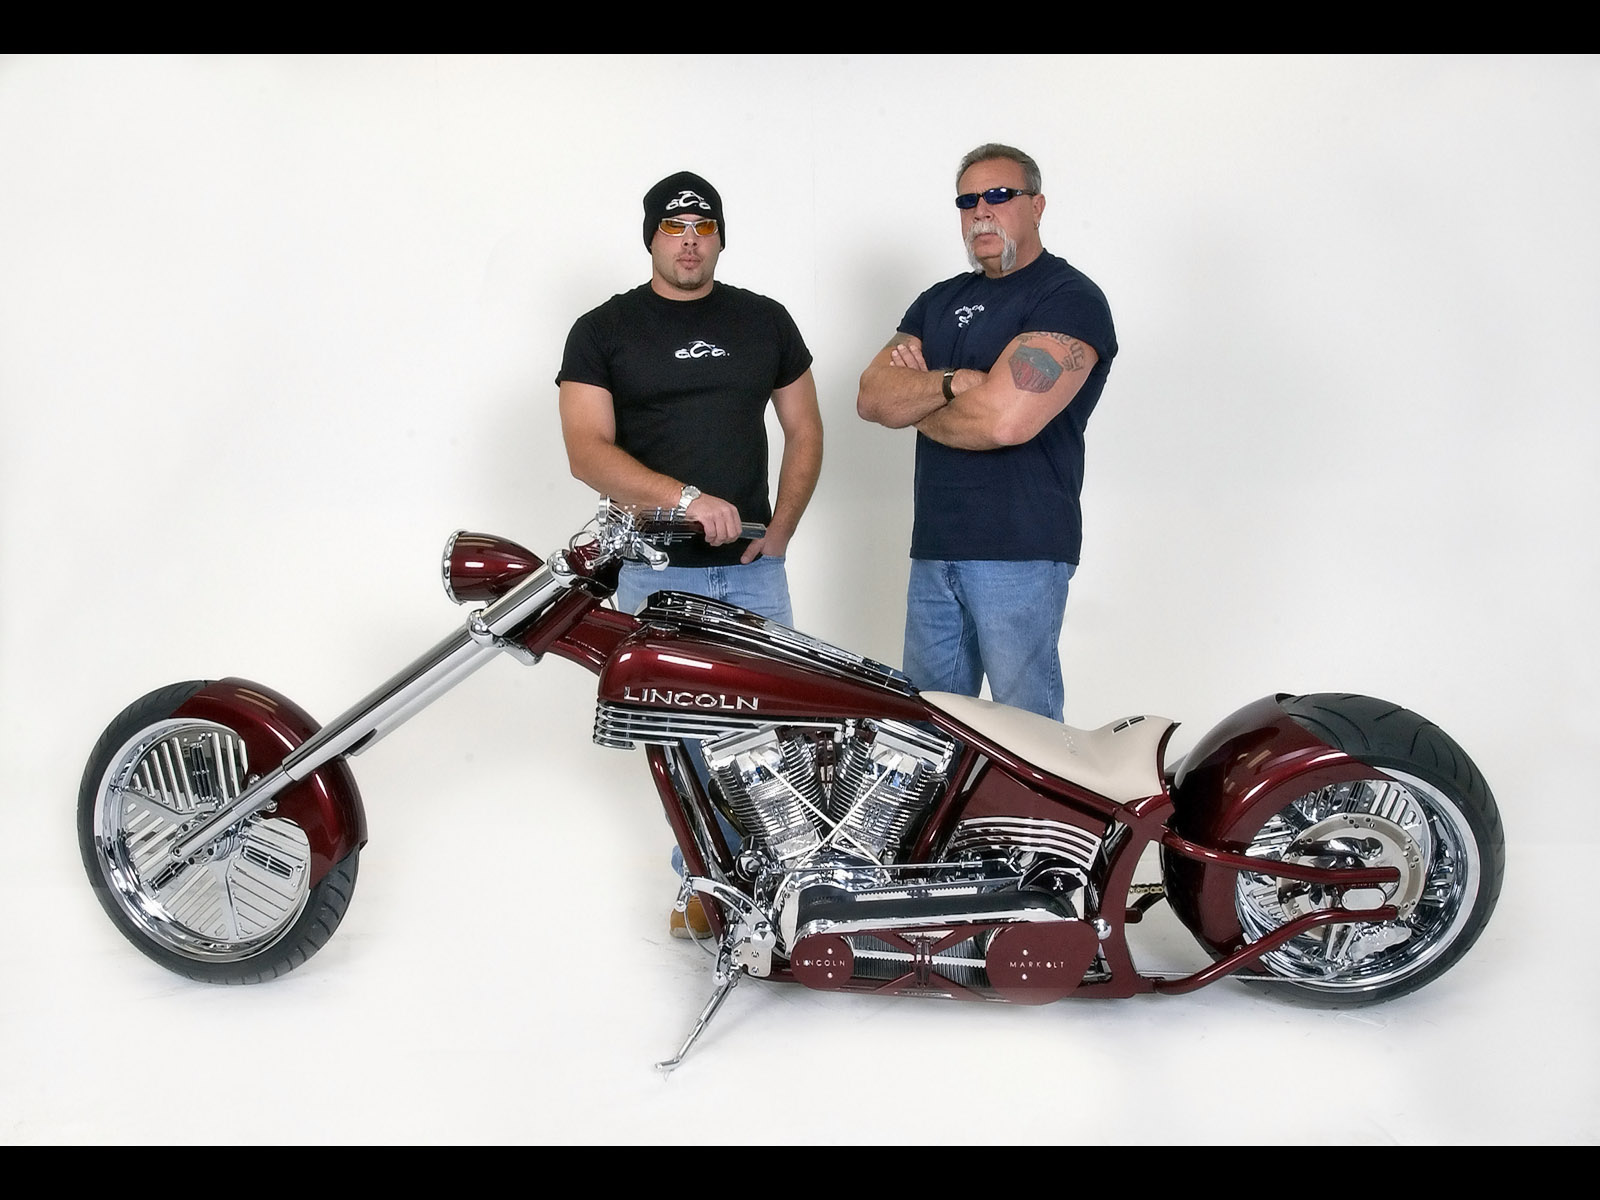 High Resolution Wallpaper | Orange County Choppers 1600x1200 px